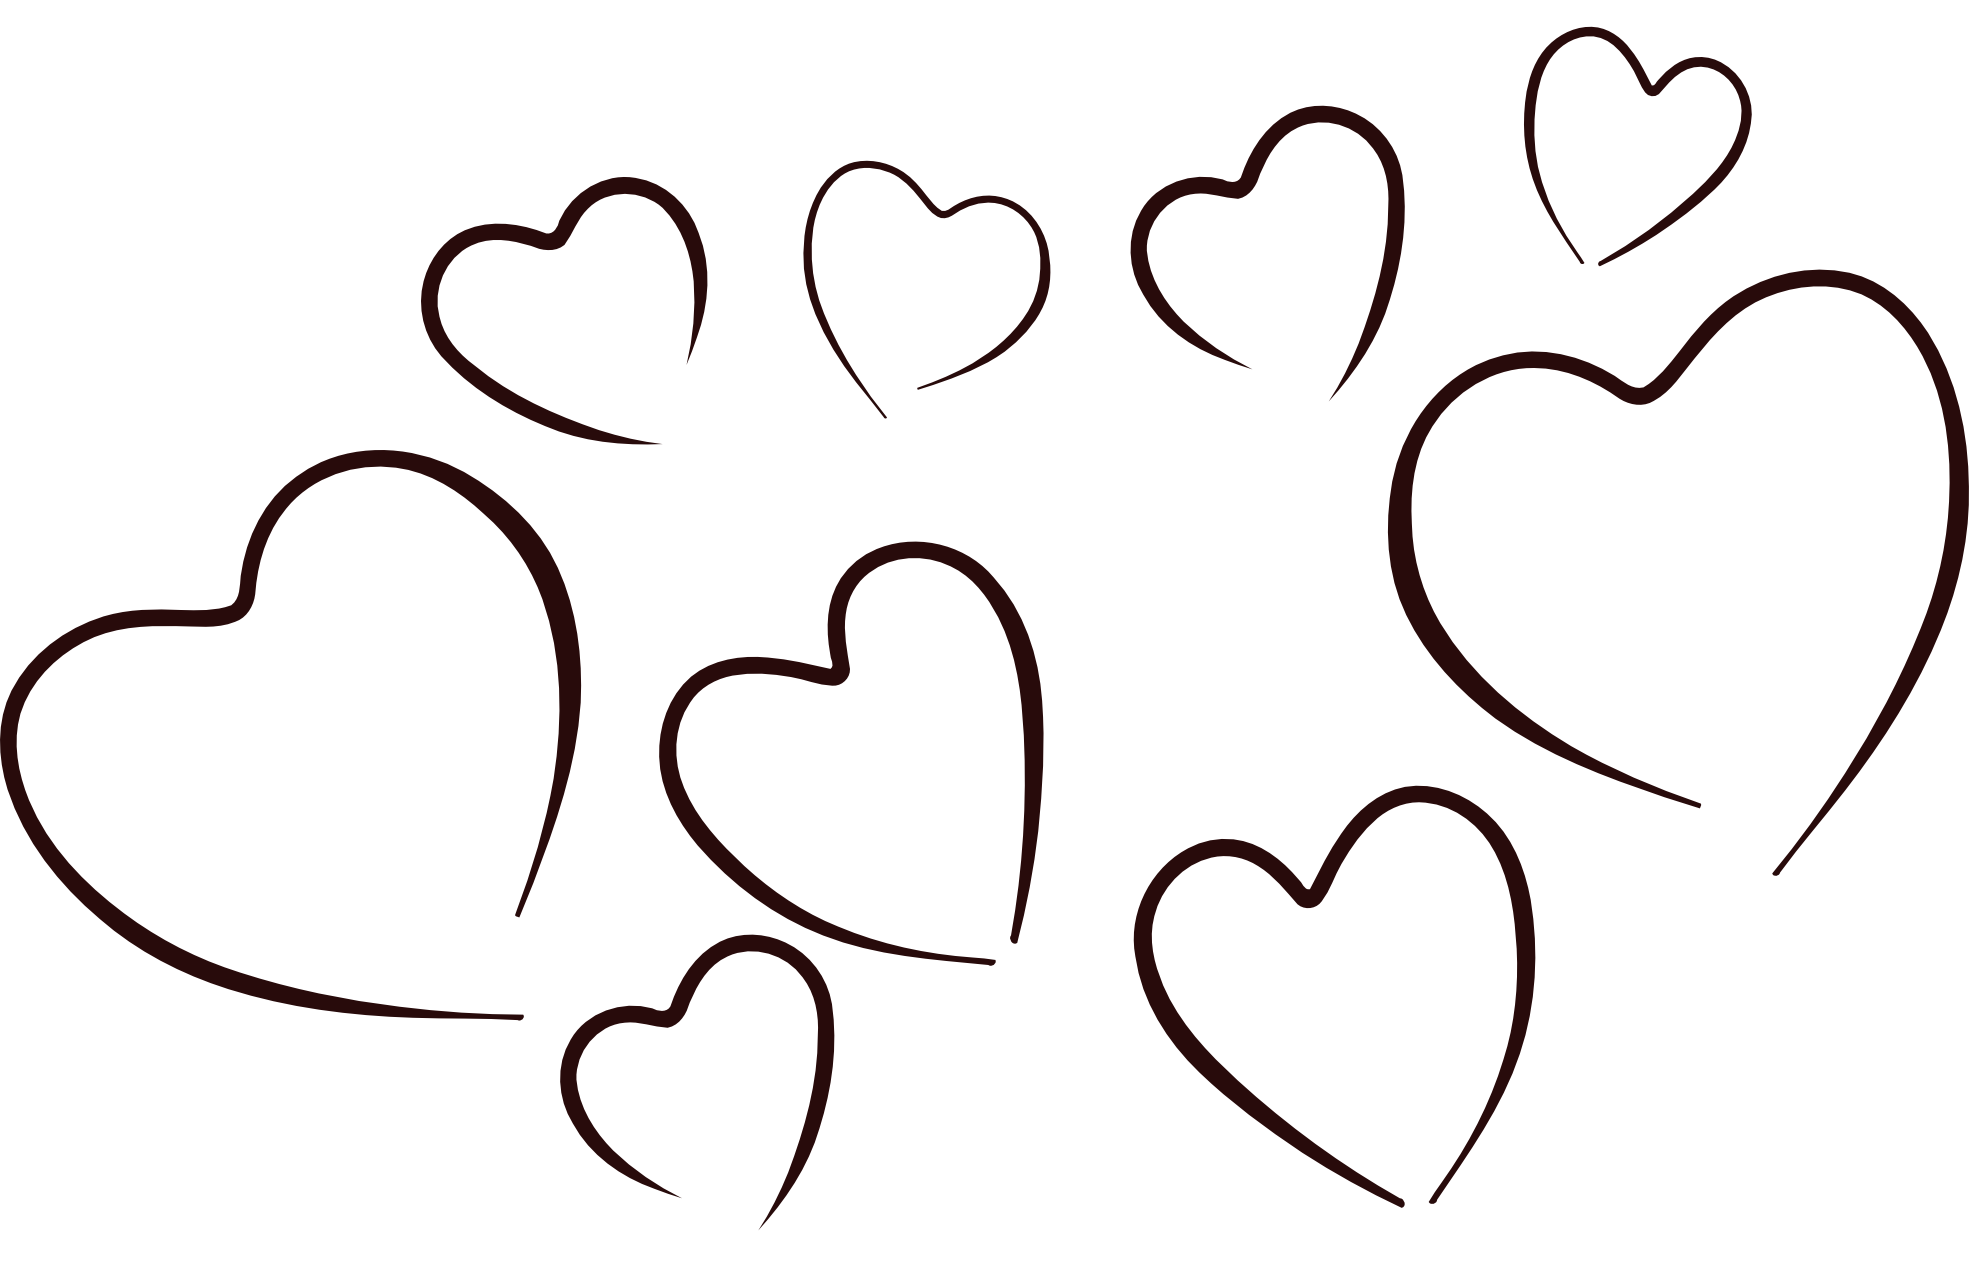 Heart Clipart Black And White - HD clipart file - valentine heart clipart black and white, swirl heart clipart, open heart large jane seymour clip art, interlocking hearts clipart, heart with cross inside clipart, heart shapes clipart, heart key clipart, heart clipart png, heart clip art, heart border clipart black and white, gold heart clip art, free clip art hearts, drawn heart clipart, dog heart clipart, conversation heart clip art, clipart purple heart, clipart of heart, clipart heart black and white, clip art heart black and white, arrow heart clipart